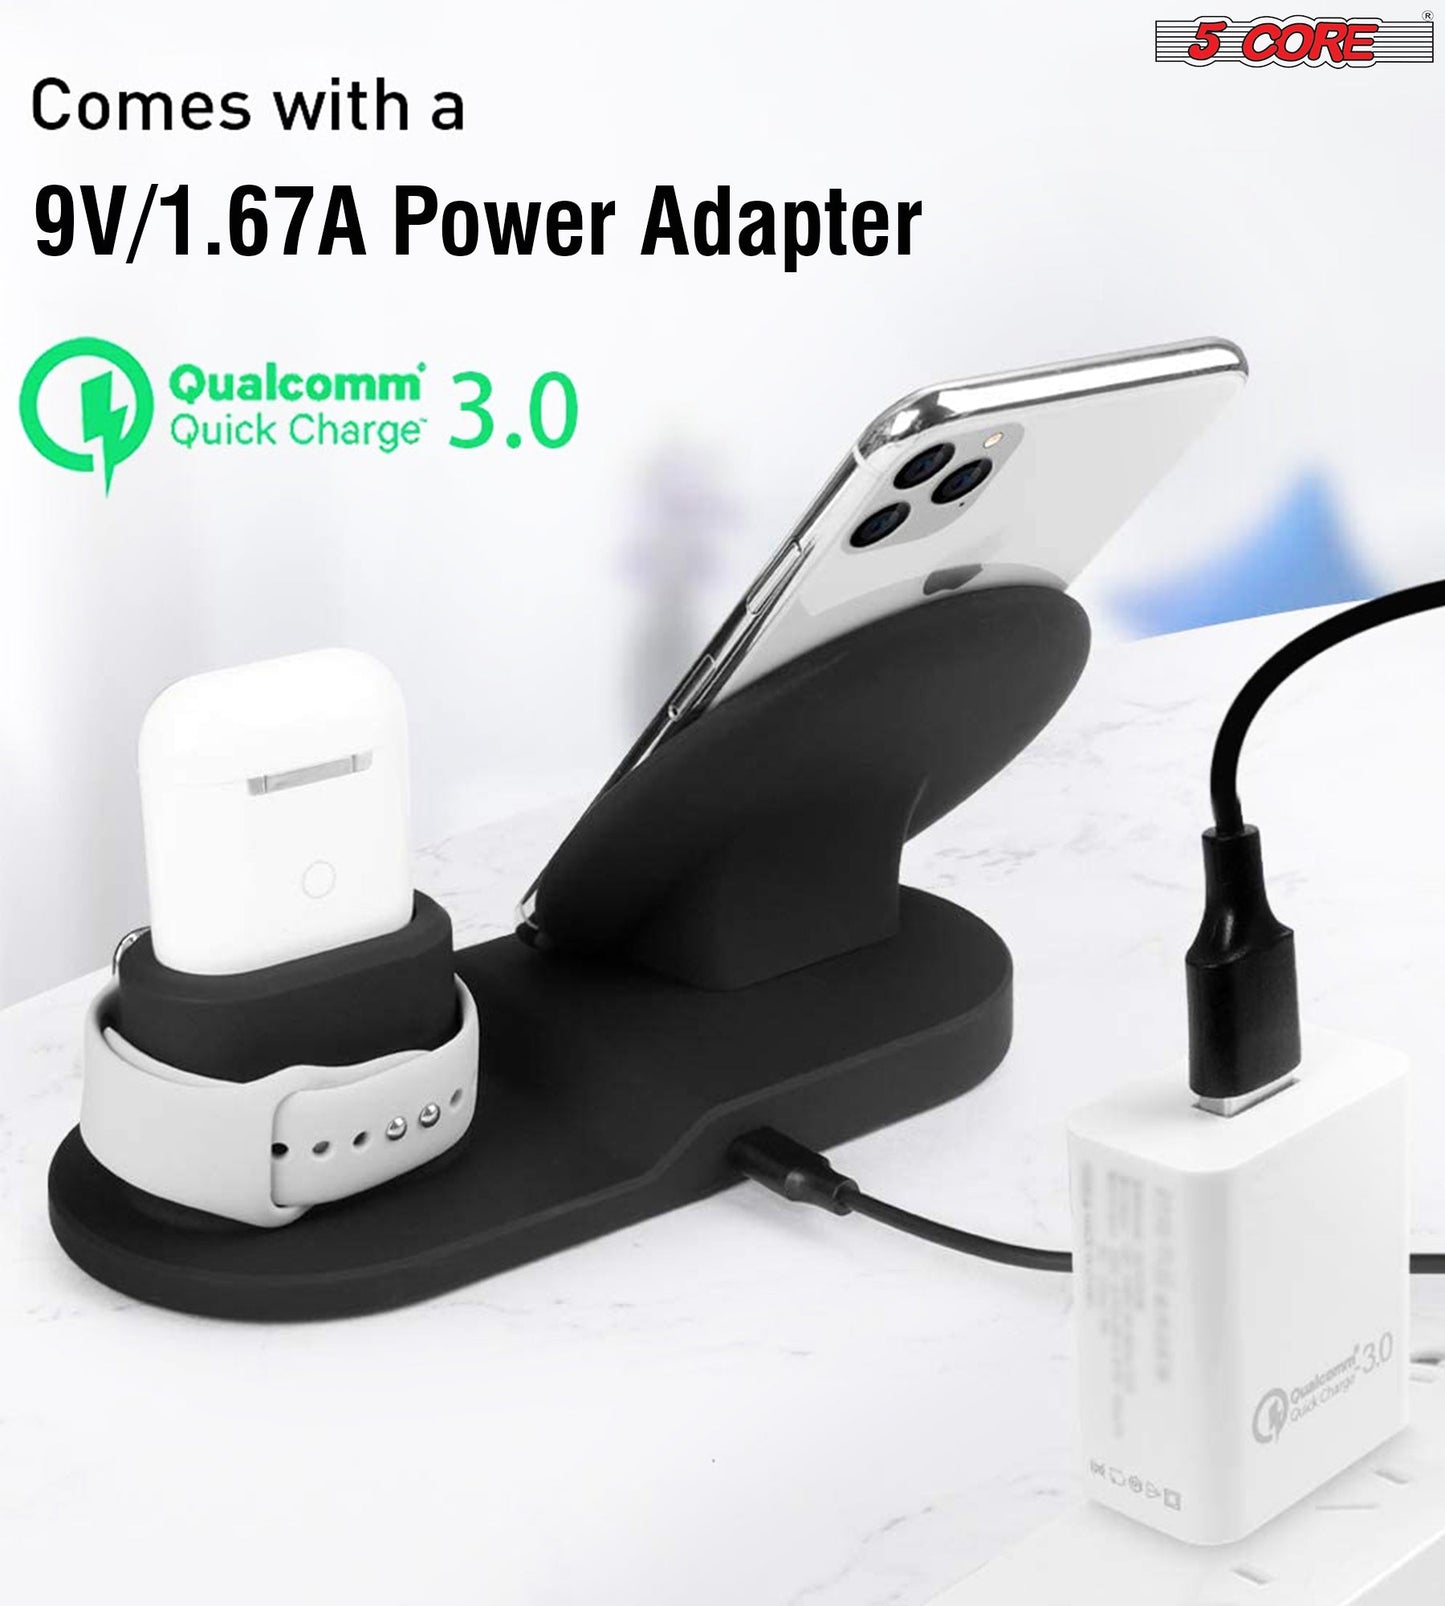 5 Core 3 in 1 Qi Wireless 10W / 15W Fast Charging Pad Stand Dock For